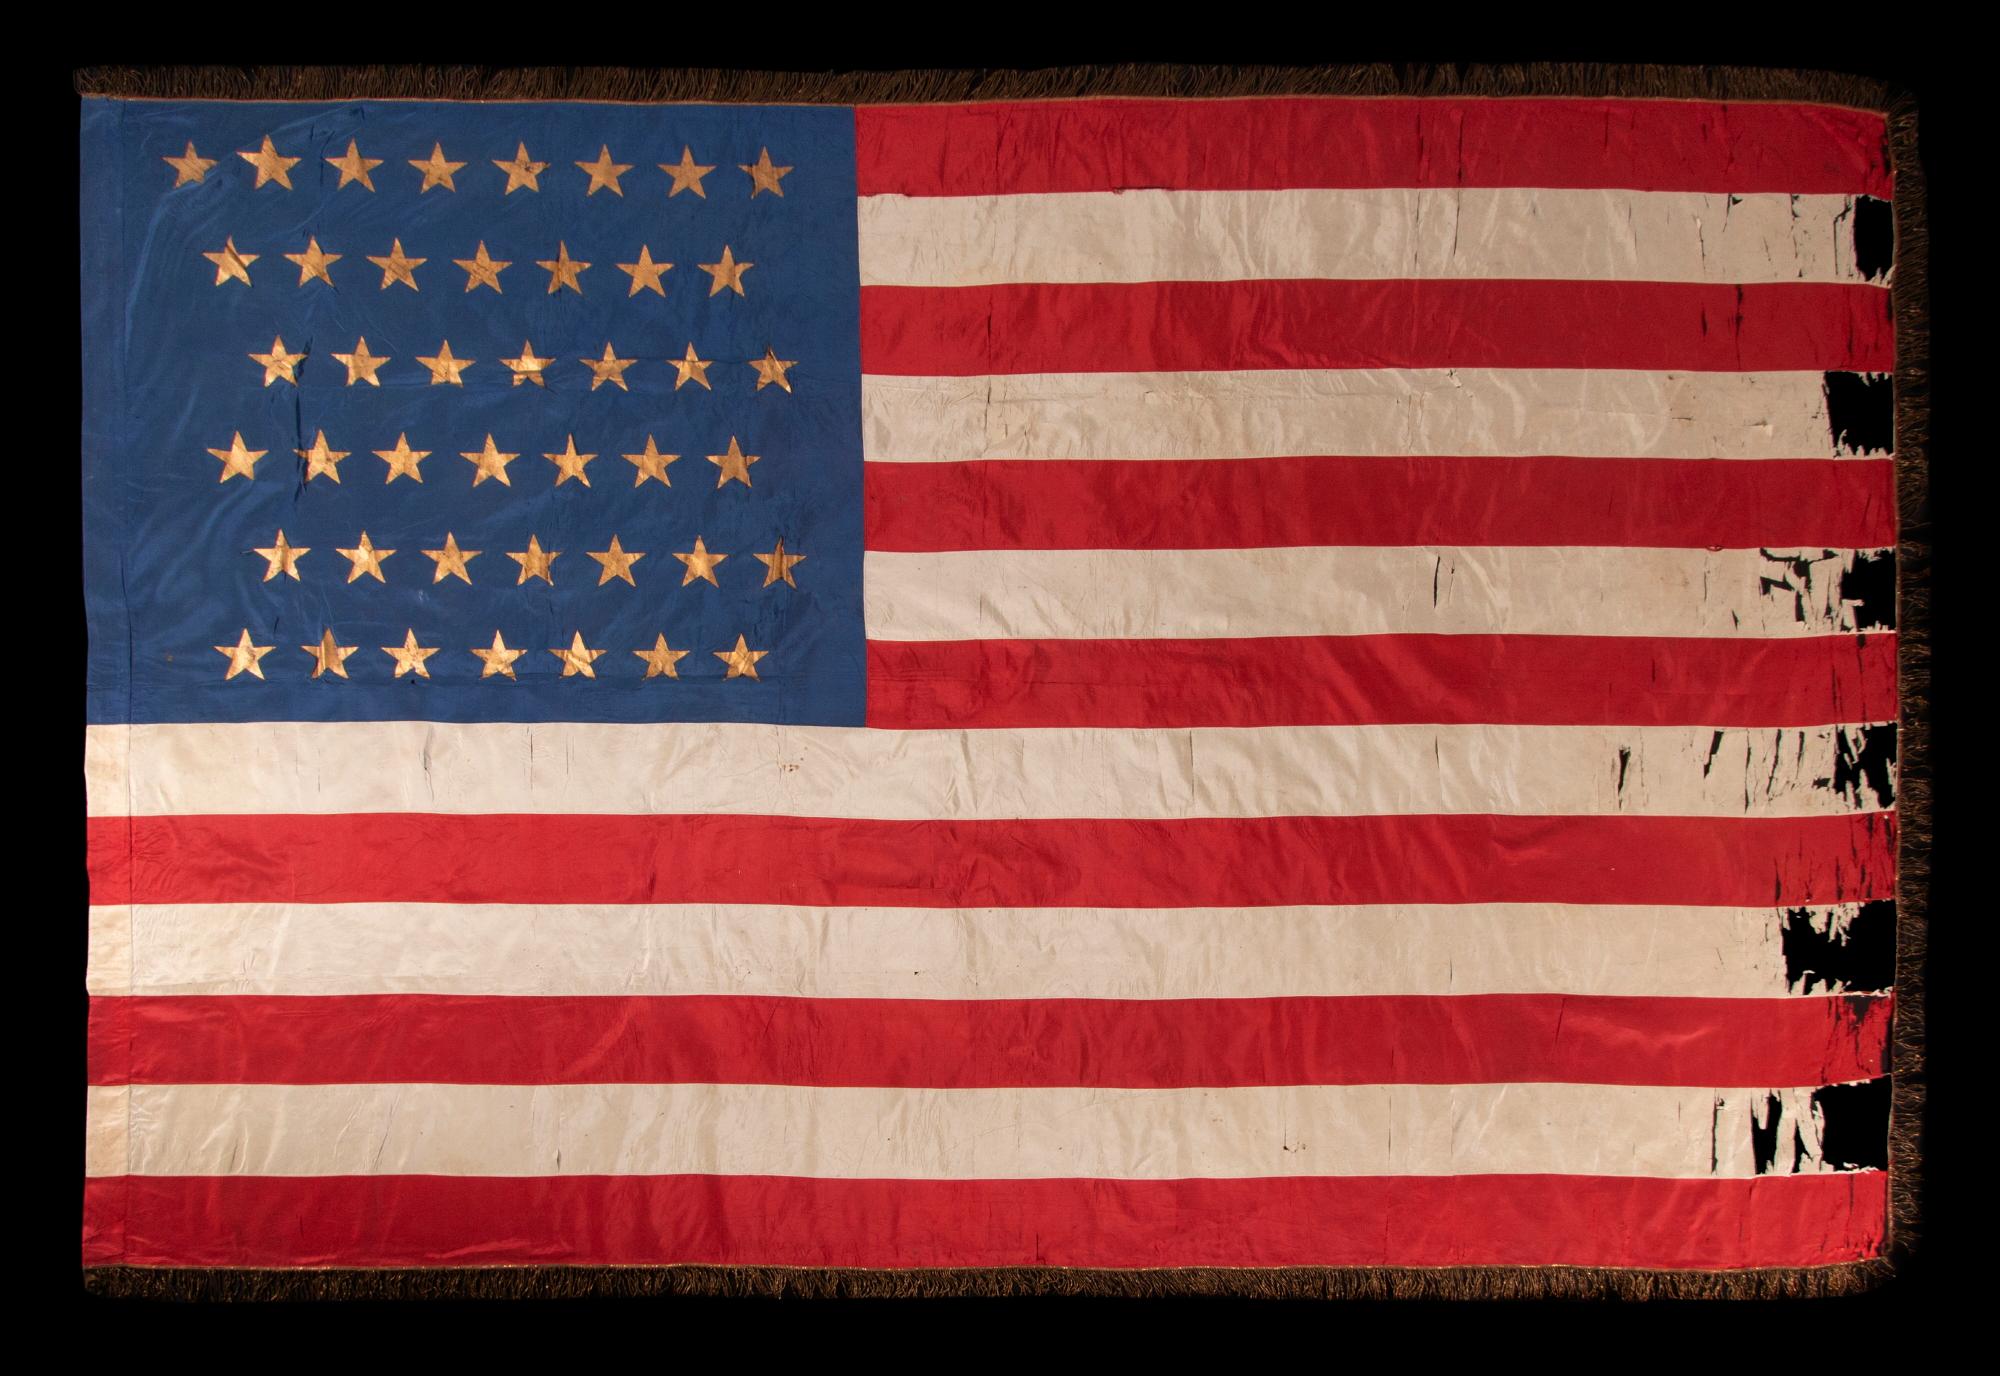 43 Star Antique Silk American Flag, Idaho Statehood, ca 1890 In Good Condition For Sale In York County, PA